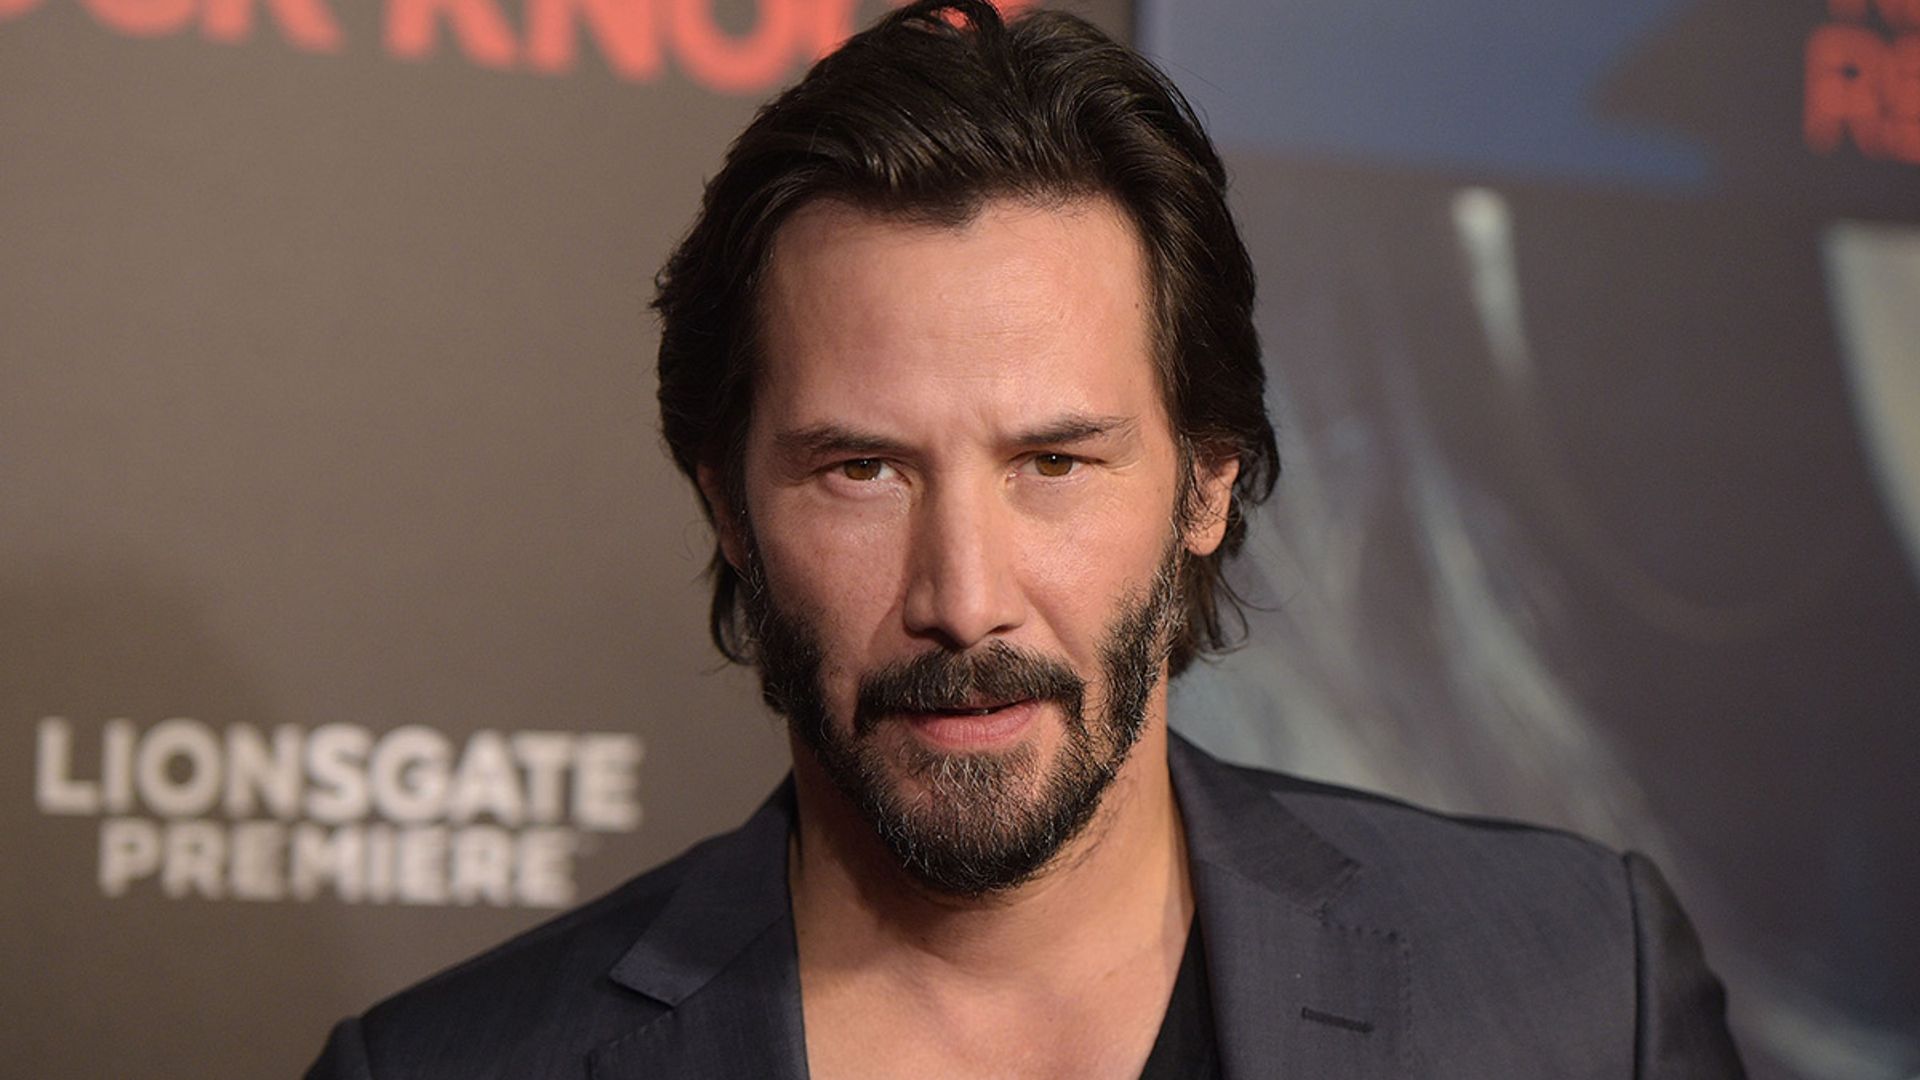 Keanu Reeves did a blind audition for Toy Story 4